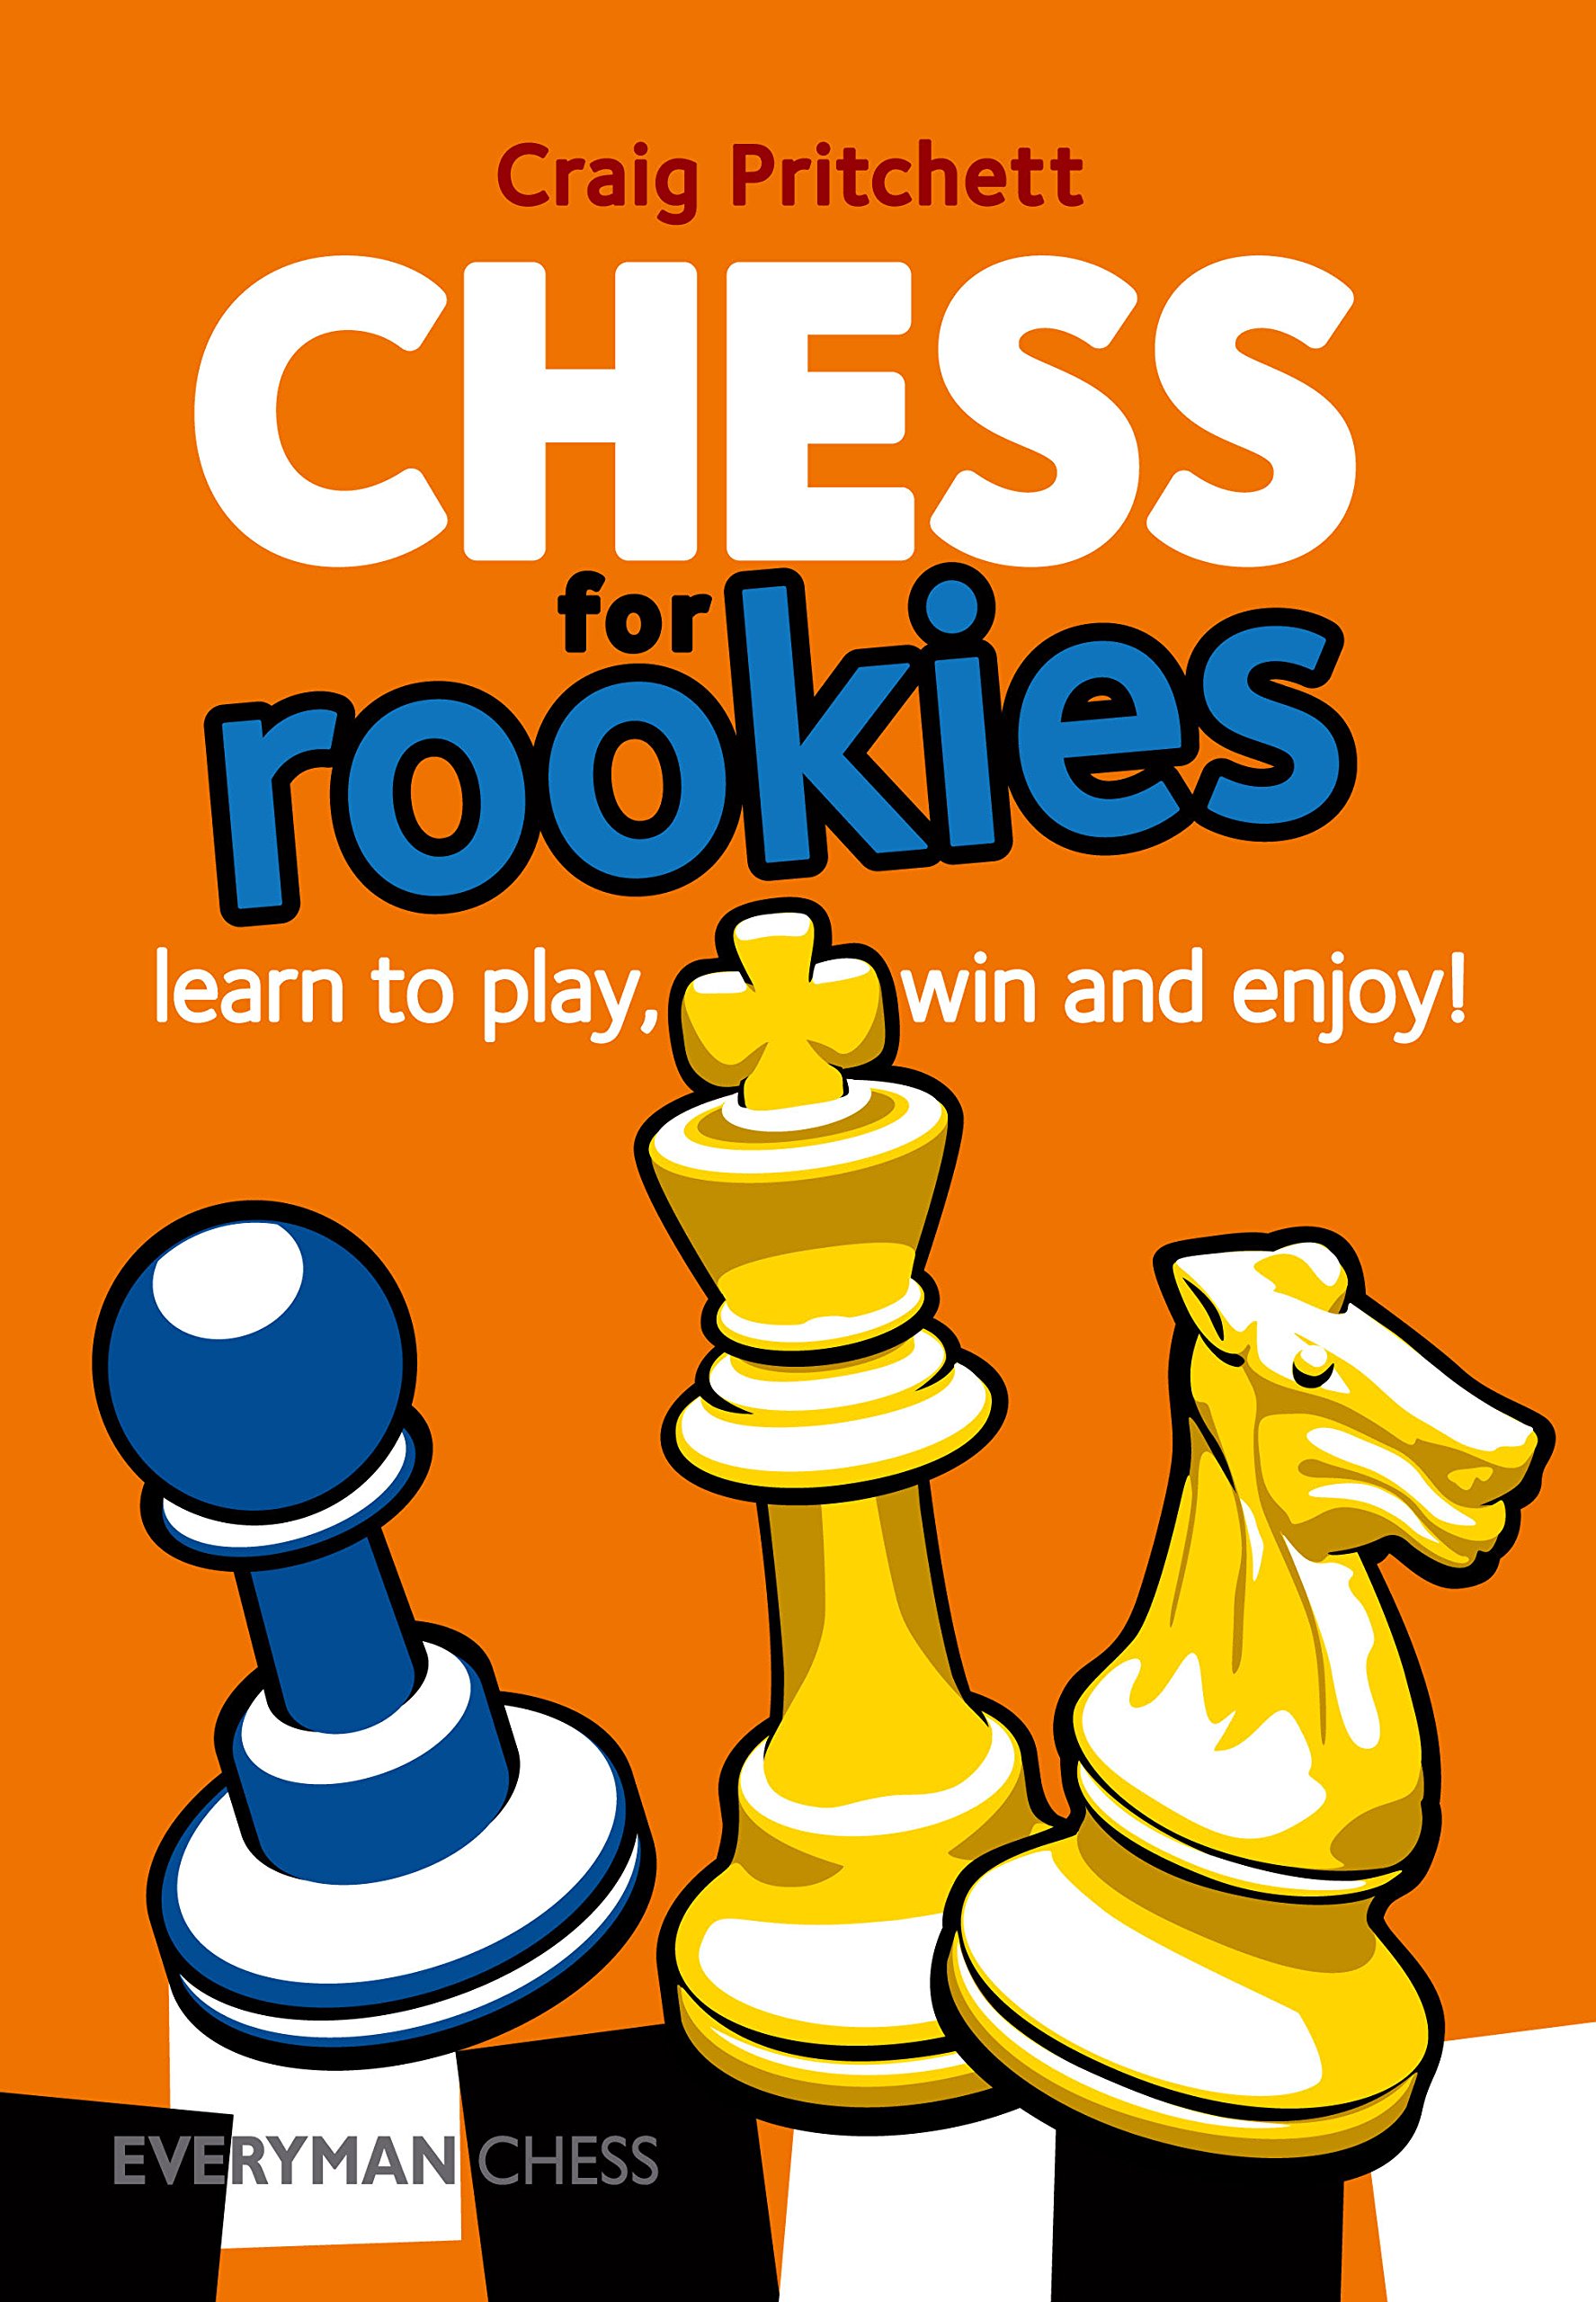 Chess clipart rookie, Chess rookie Transparent FREE for download on